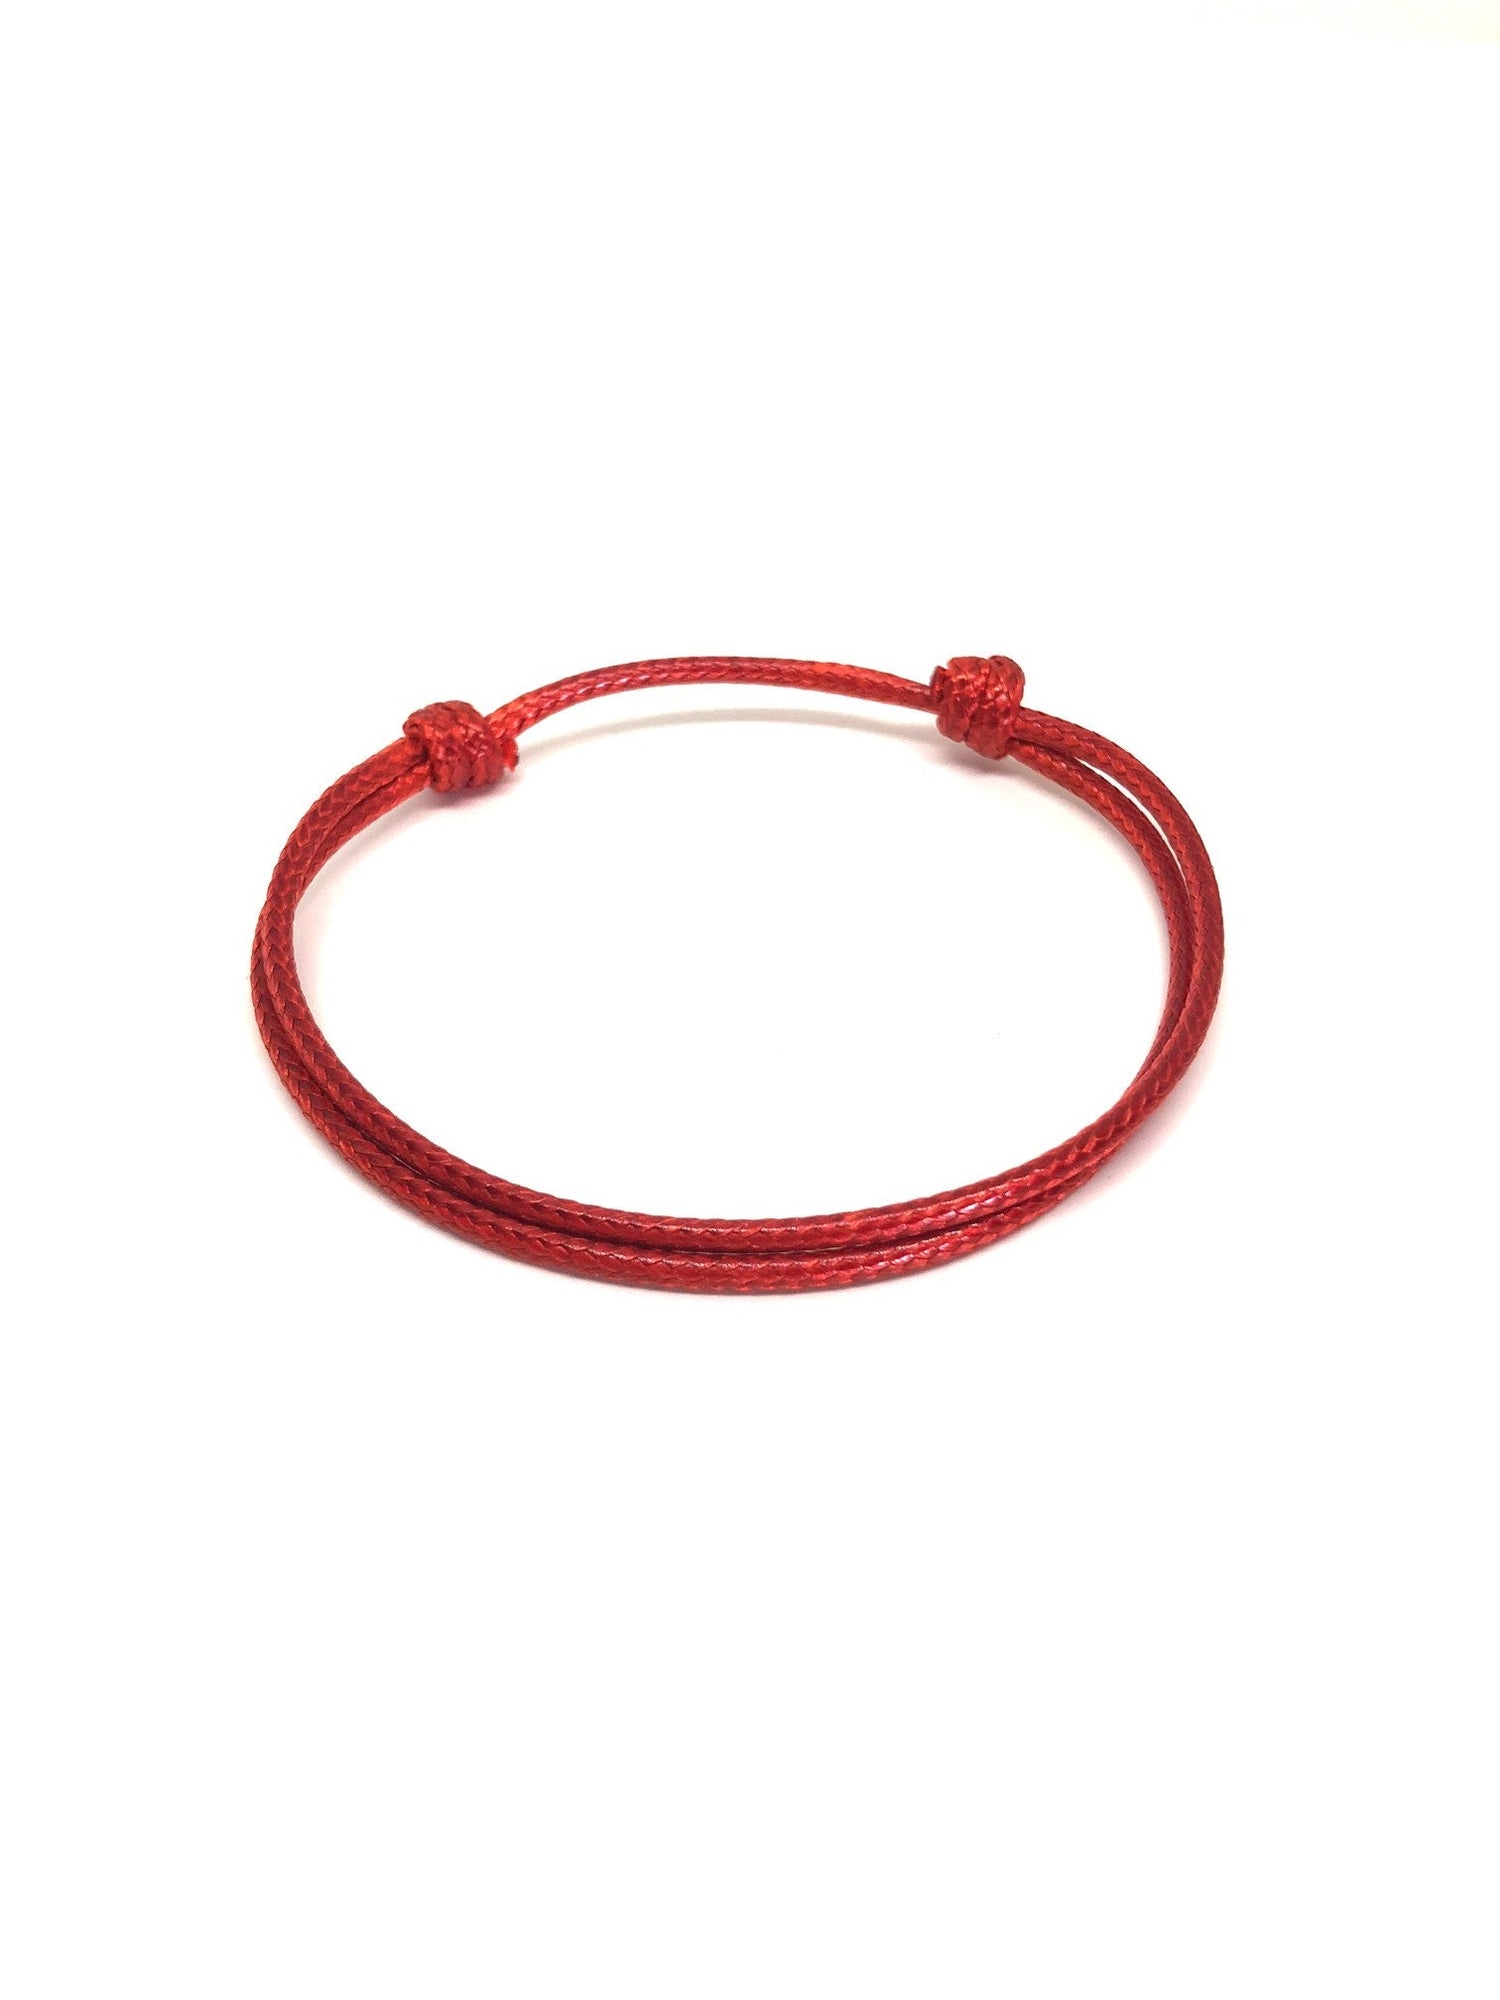 Family Bracelet, Minimalist Bracelet, Red, His and Hers, Anklet, Unisex, Family Reunion, Favors, Bridesmaids, Good luck, Boys Favors